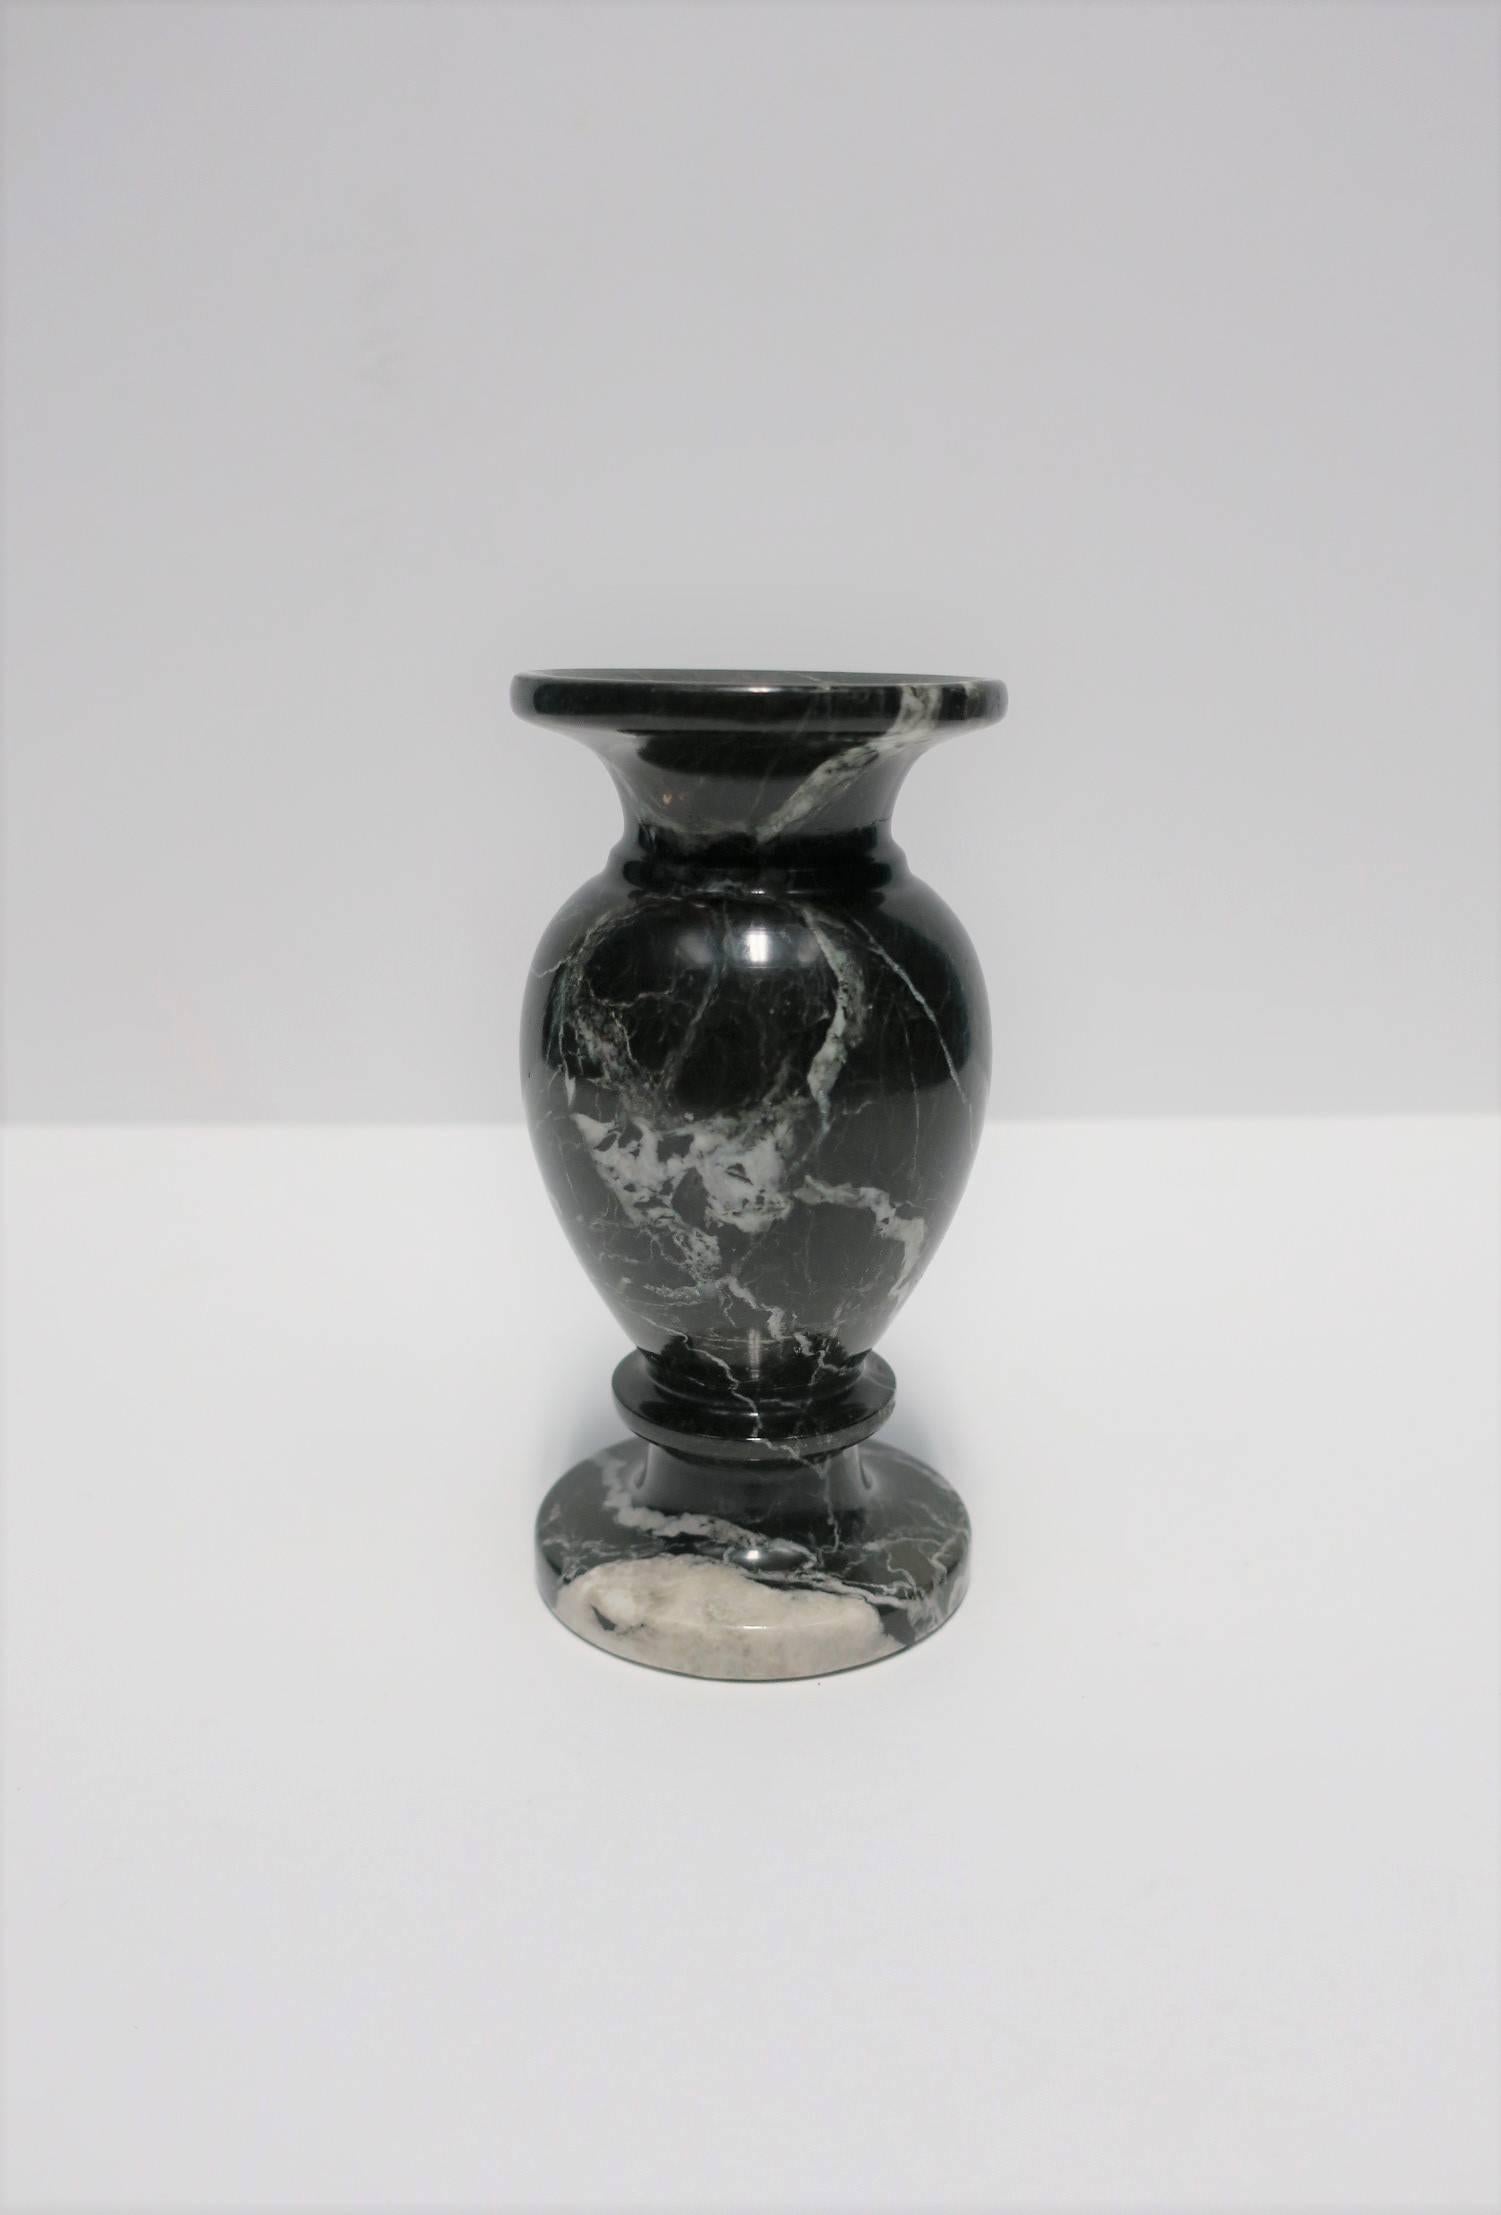 A beautiful and substantial black and white marble urn shaped vase, in the Neoclassical design style, circa mid-20th century. Vase is predominately black with white veining throughout, also known as Nero marble. Urn/vase measures: 3